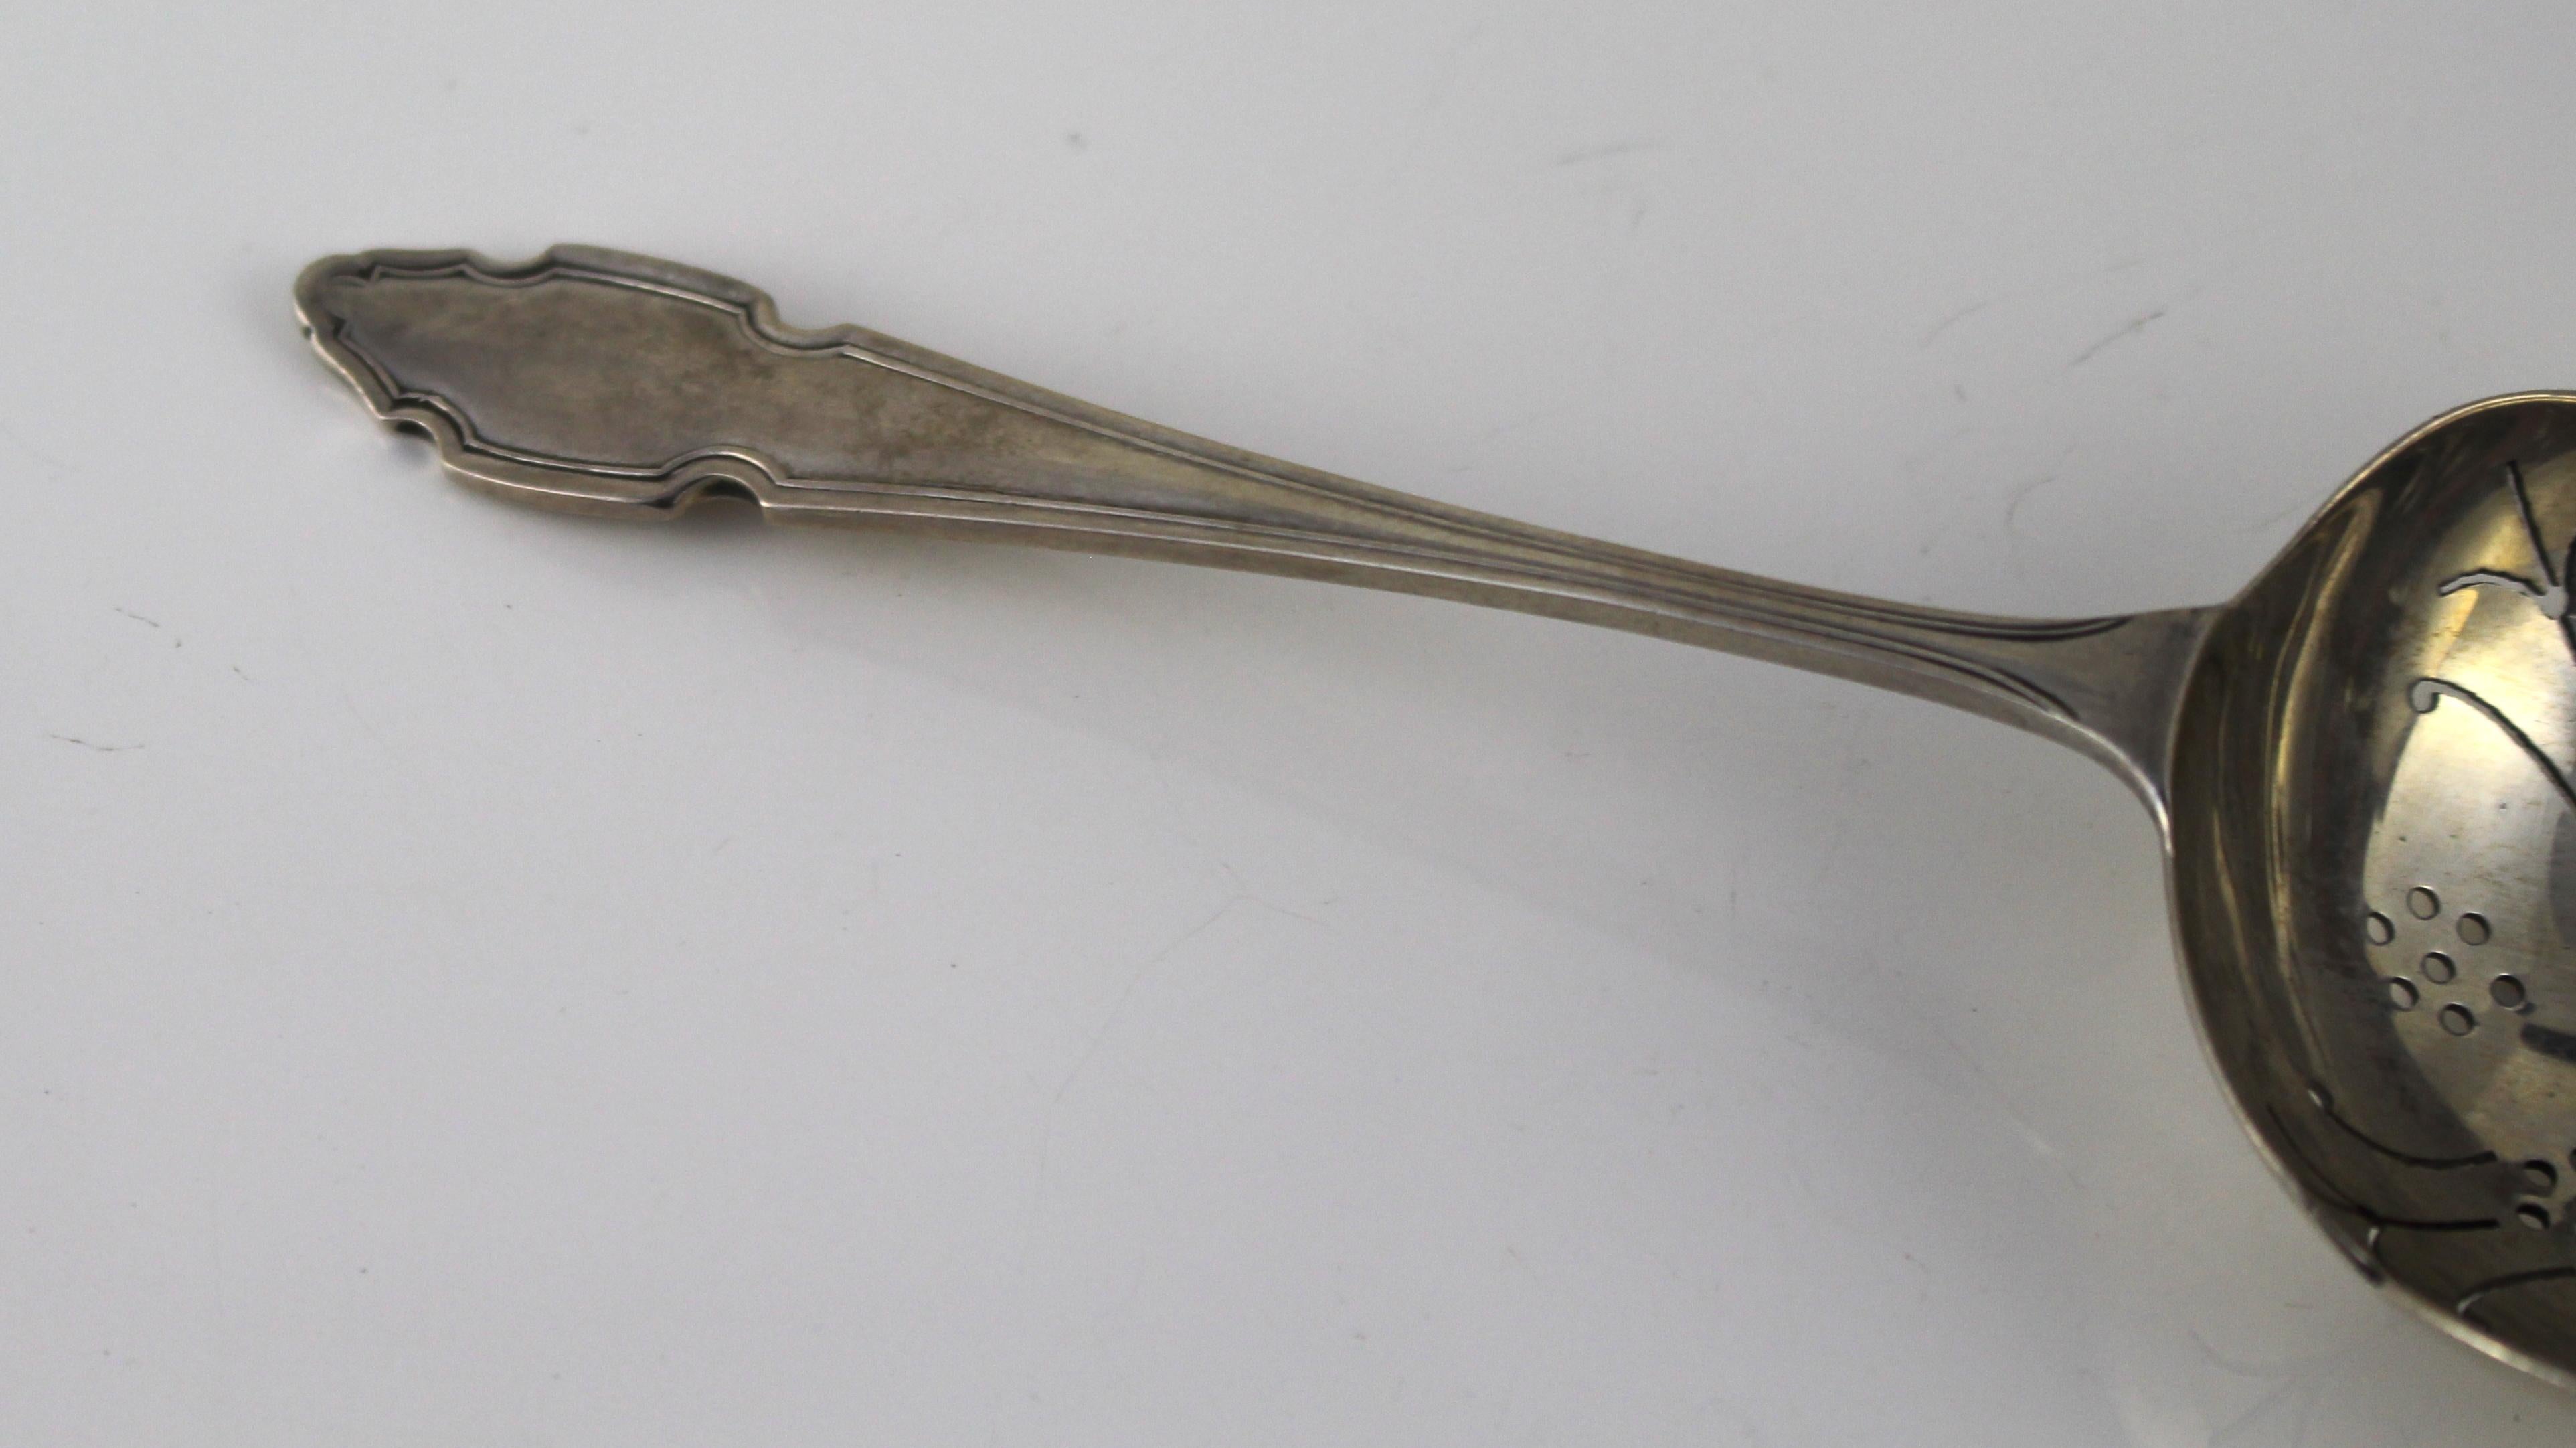 Period mid-20th century, English
Maker Cooper Brothers & Sons Ltd
Hallmark Sheffield, 1961
Measures: Length 14.5 cm / 5 3/4 in
Weight 41.2 g
Condition Very good condition commensurate with age
 

 

Good quality heavy solid silver tea